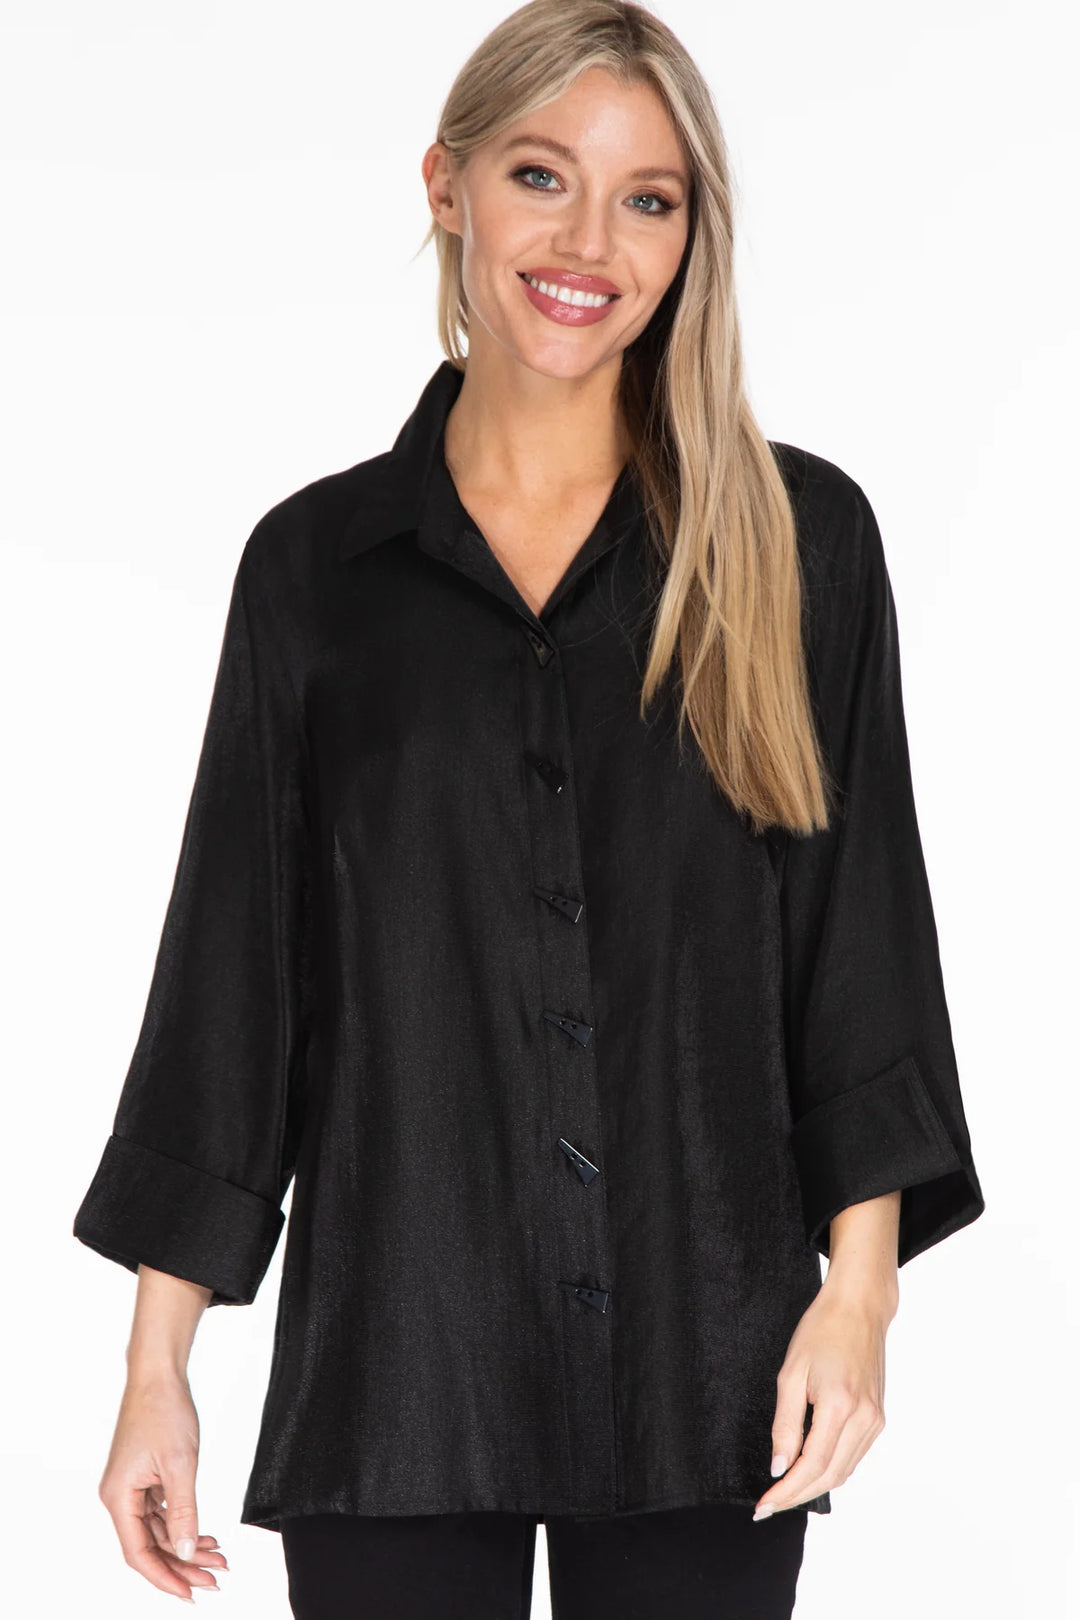 Multiples Black Turn Up Cuff Button Top